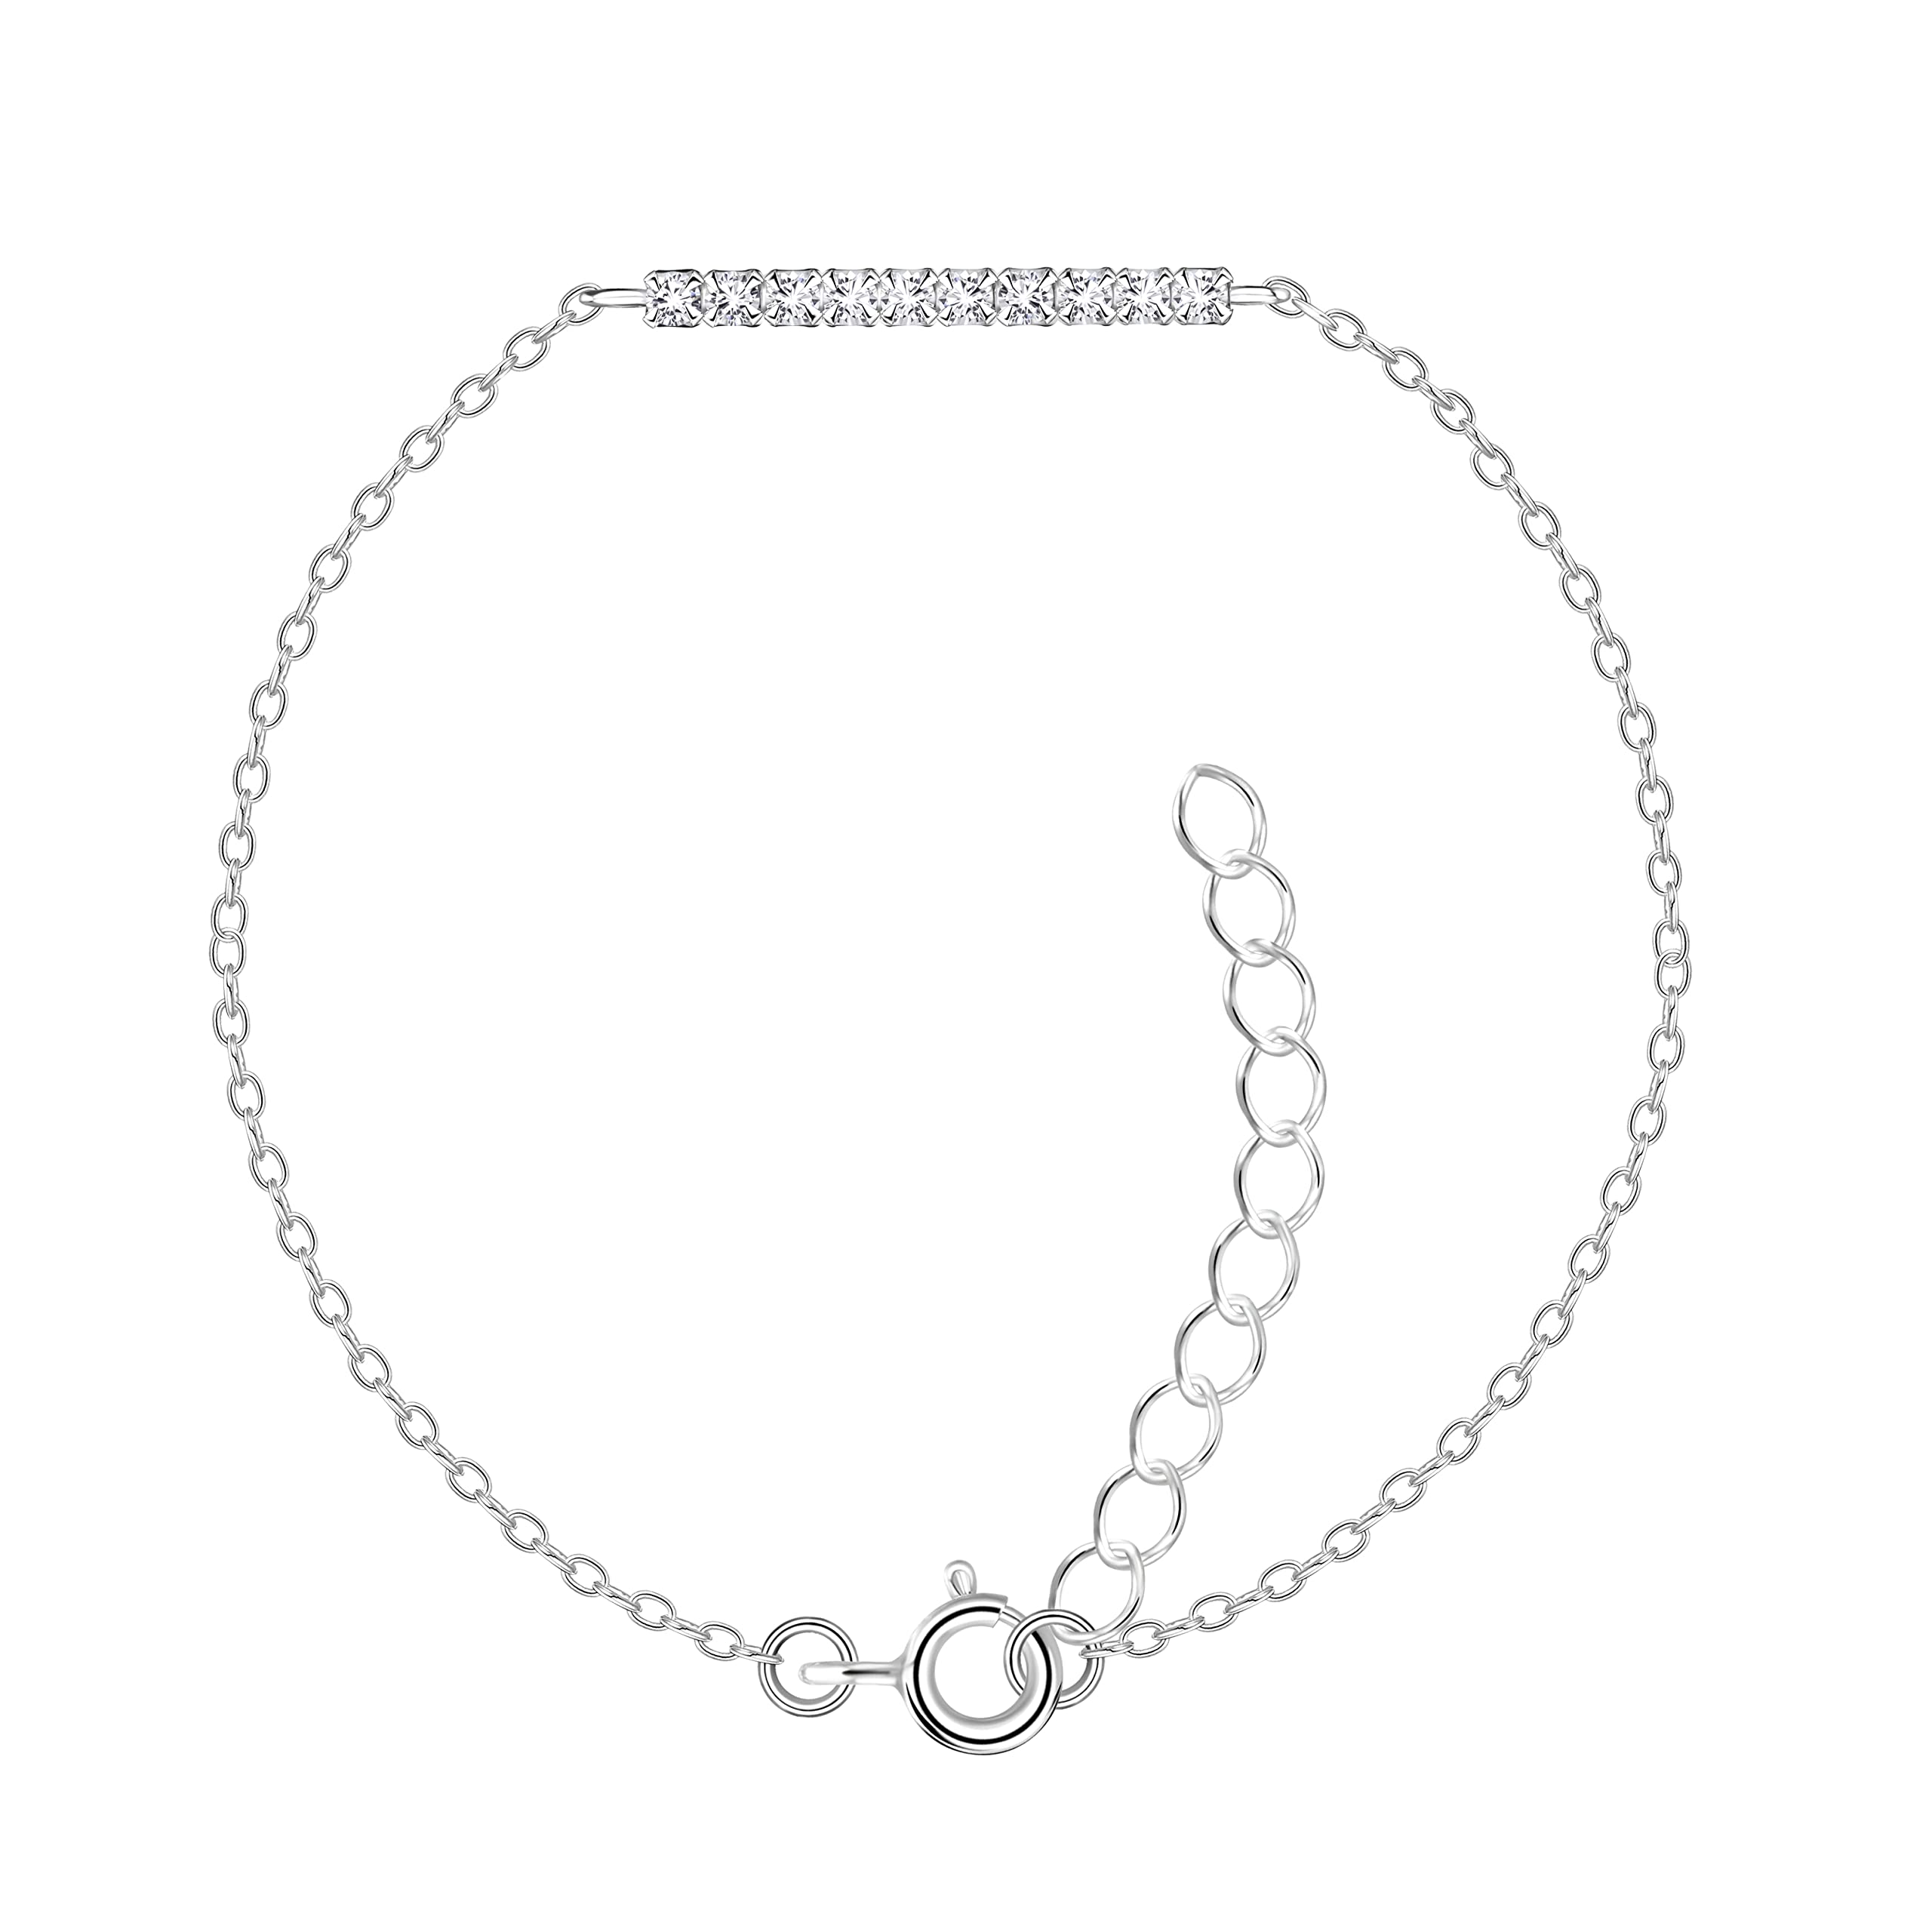 ASG Womens 925 Sterling Silver Infinity Endless Love Symbol Charm  Adjustable Bracelet Mother's Day Gift for Wife Women Girls Mom - Walmart.com